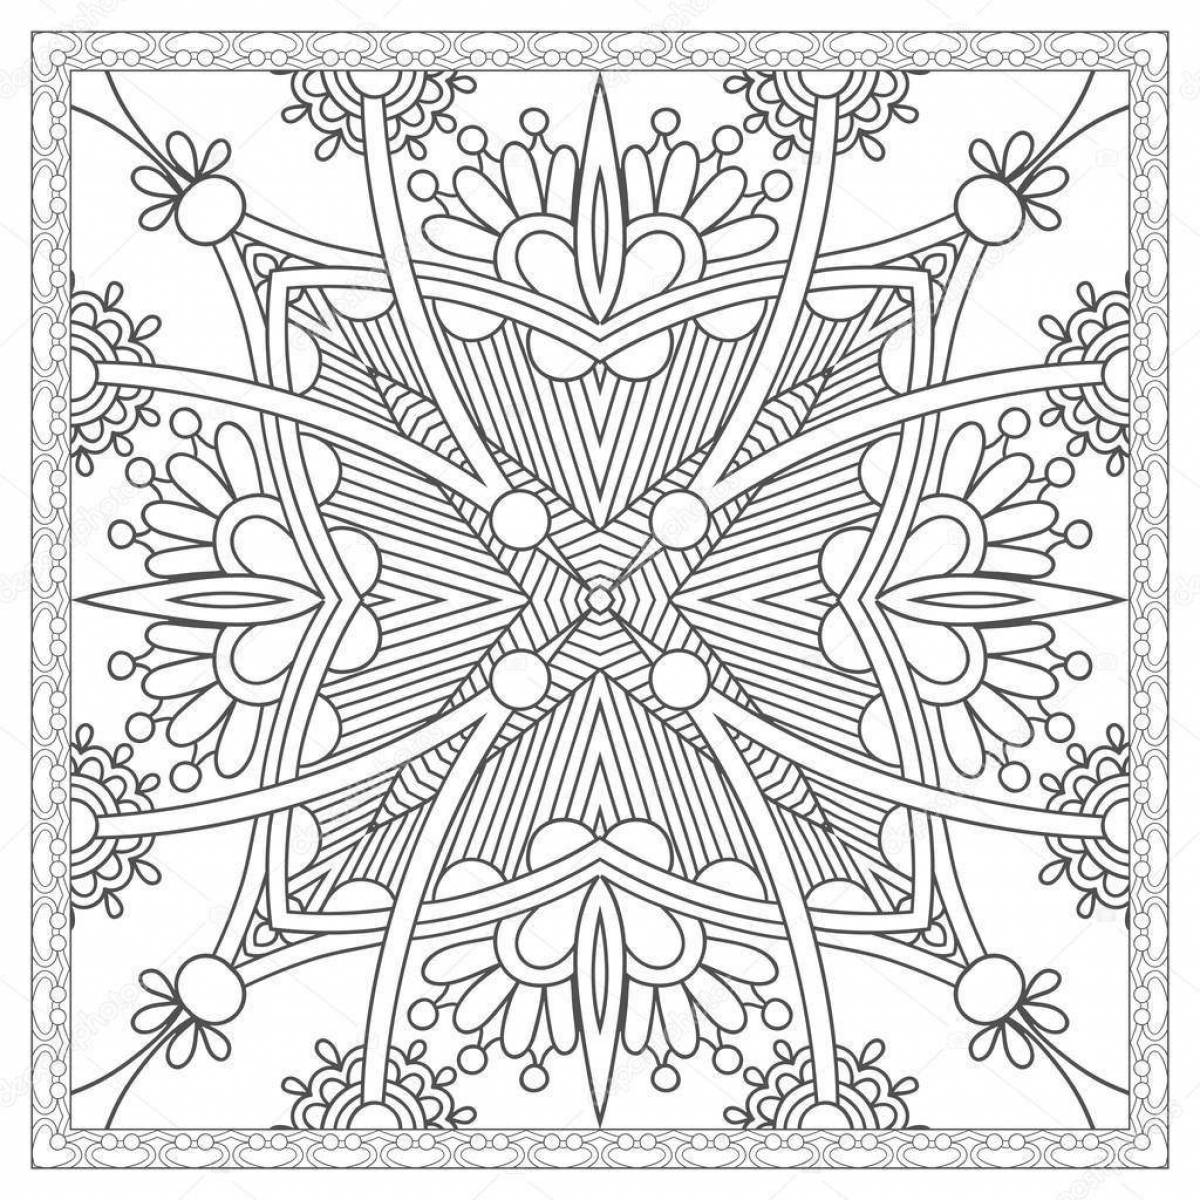 Coloring page inviting Pavloposadsky scarf